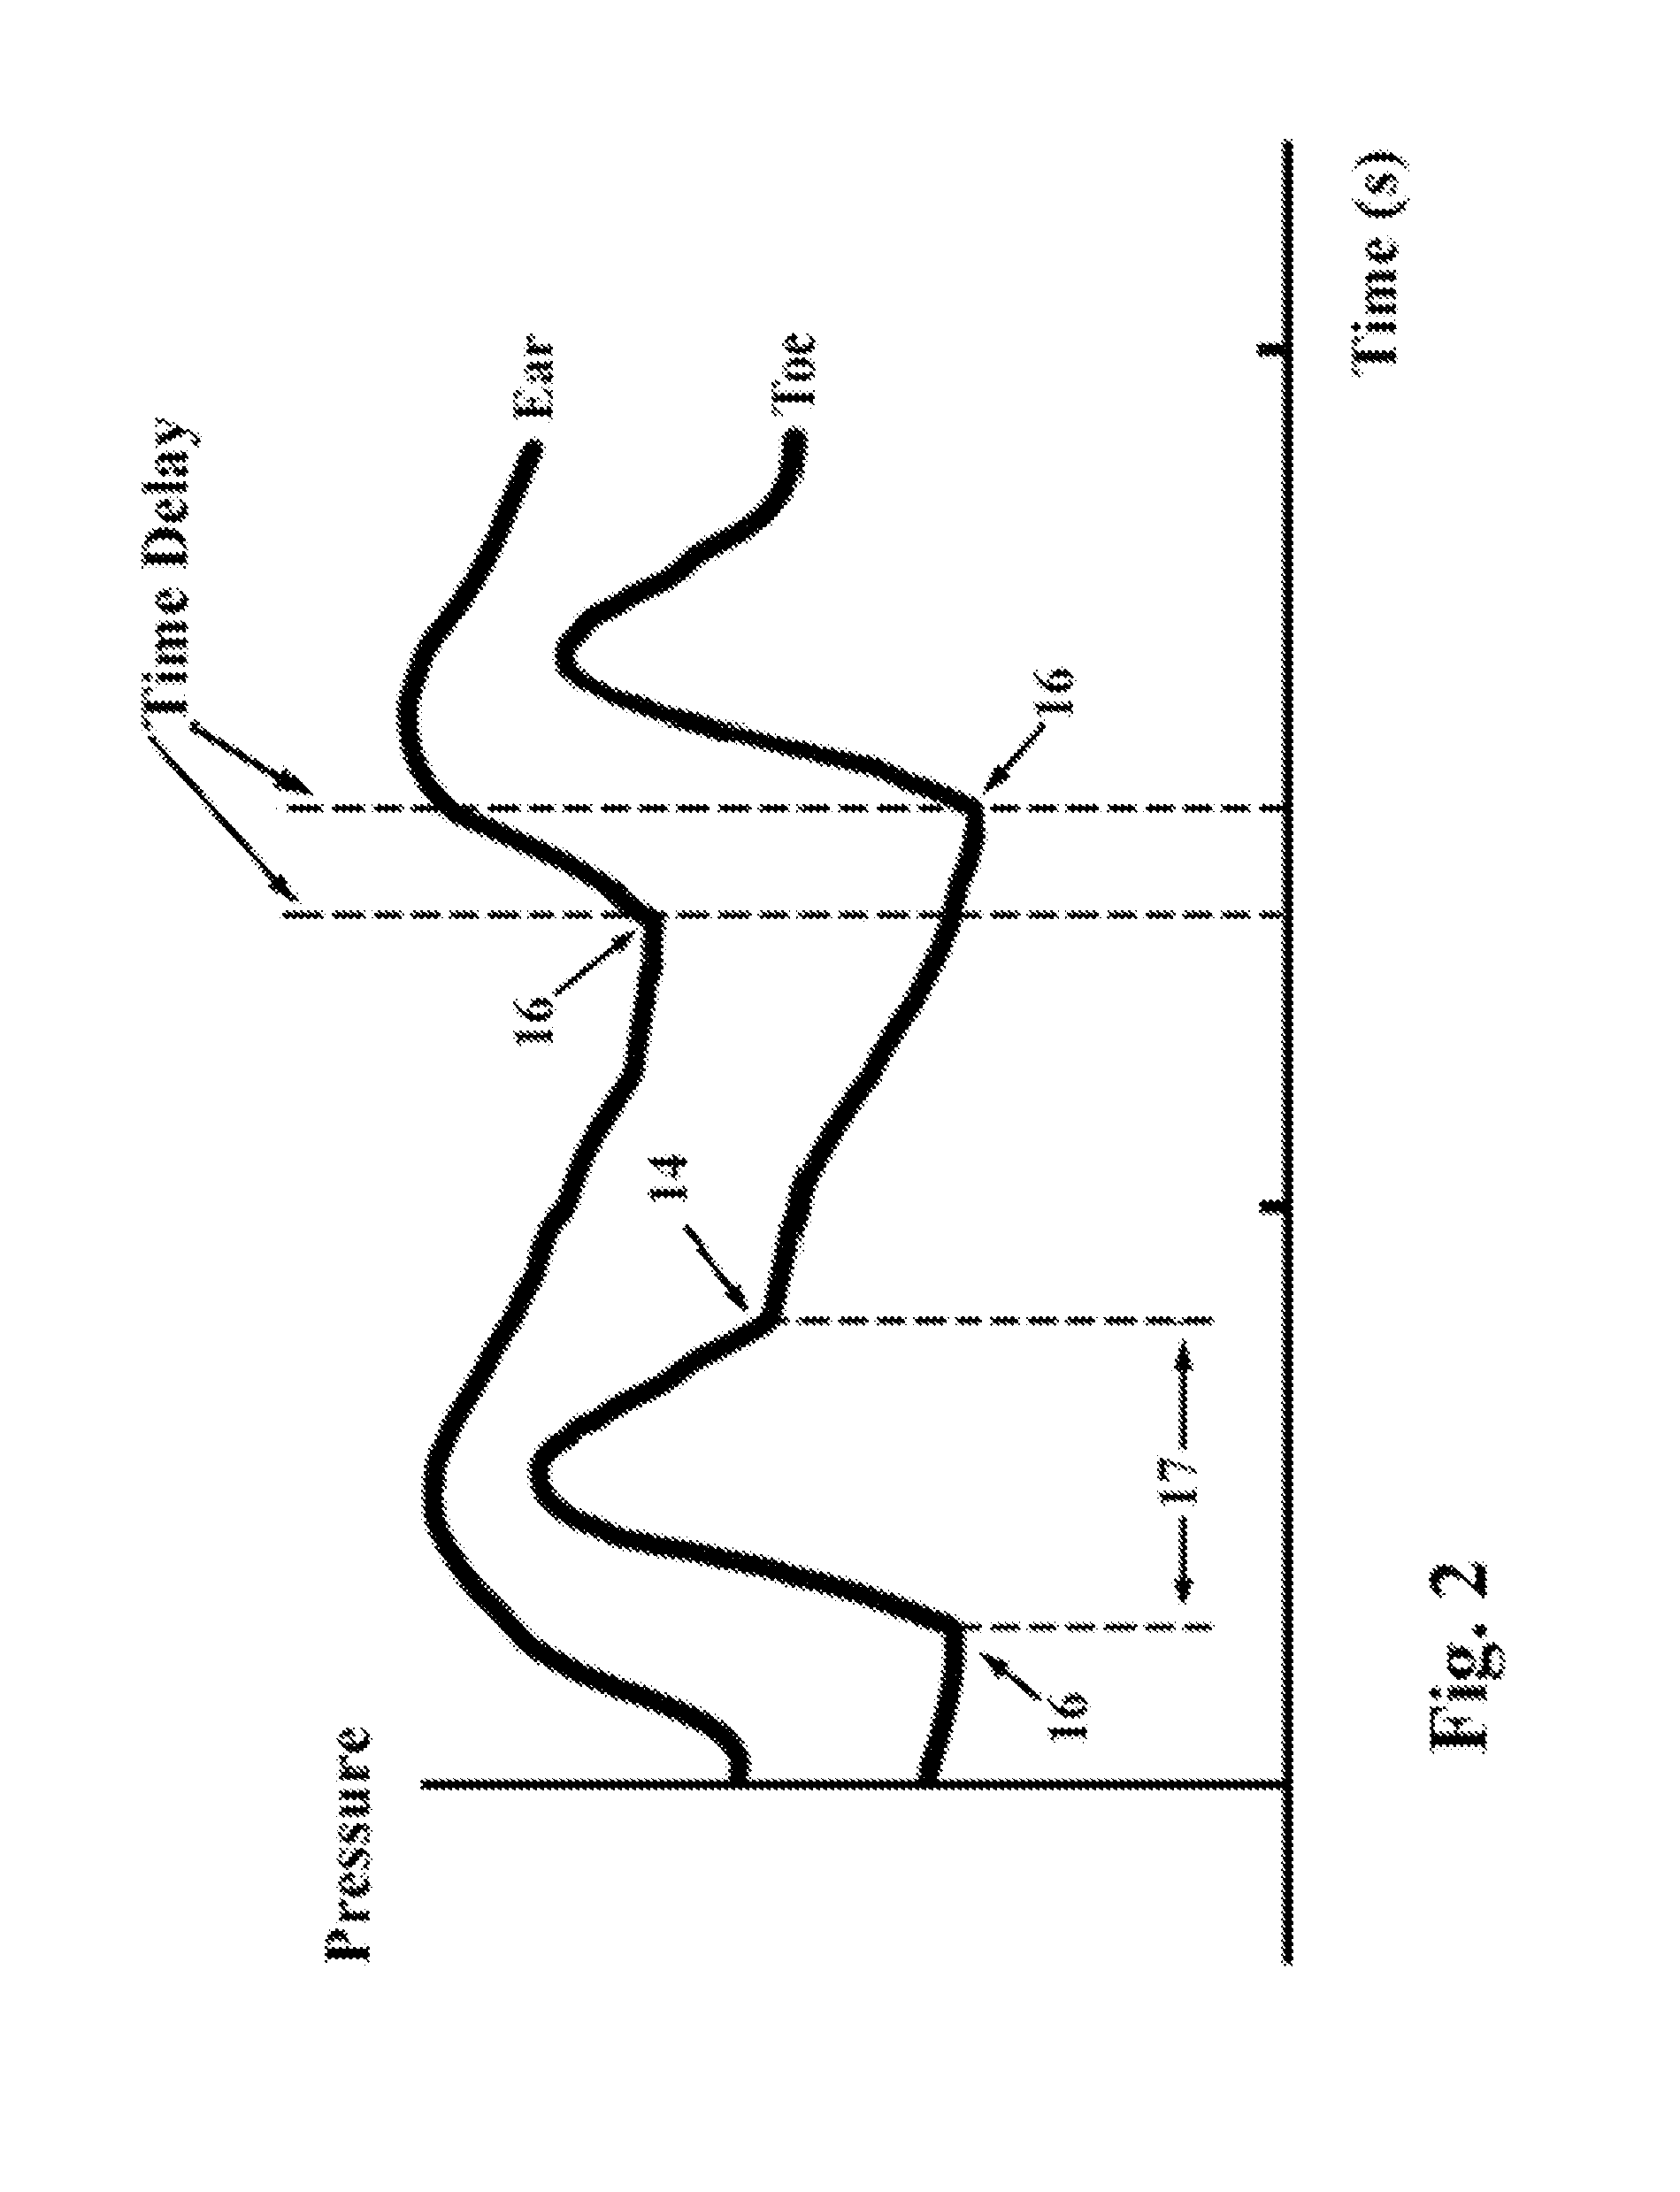 Method and apparatus for non-invasive determination of cardiac output